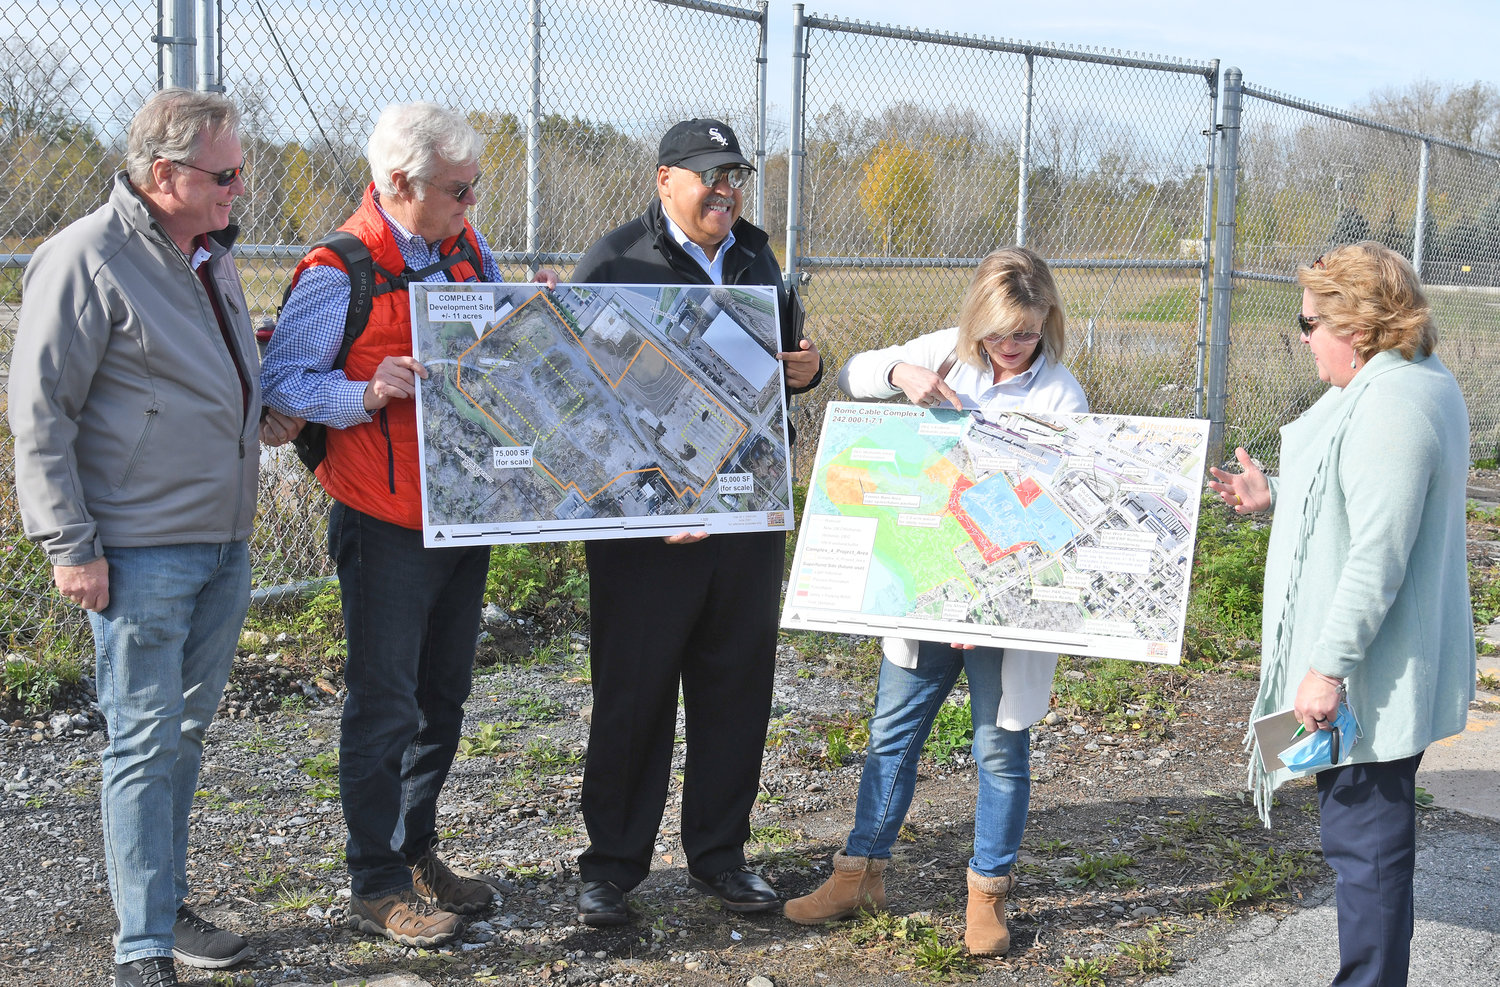 ALL THE POSSIBILITIES — Members of Counselors of Real Estate’s CRE Consulting Corps gather around the Rome Cable Complex 4 site off Henry Street to look at maps and share insights in redeveloping the brownfield Wednesday morning.  From left: Michael Hedden, managing director Integra Realty Resources, Philadelphia, Pa.; R.J. Neary, chairman of Investors Realty, Inc., Omaha, Neb.; Attorney Graham C. Grady, Taft Stettinius &amp; Hollister, LLP, Chicago, Ill.; Joelle Greenland, of the Center for Creative Land Recycling; and Christina Thoreson, lead counselor of Real Counsel, LLC, Lookout Mountain, Tenn.